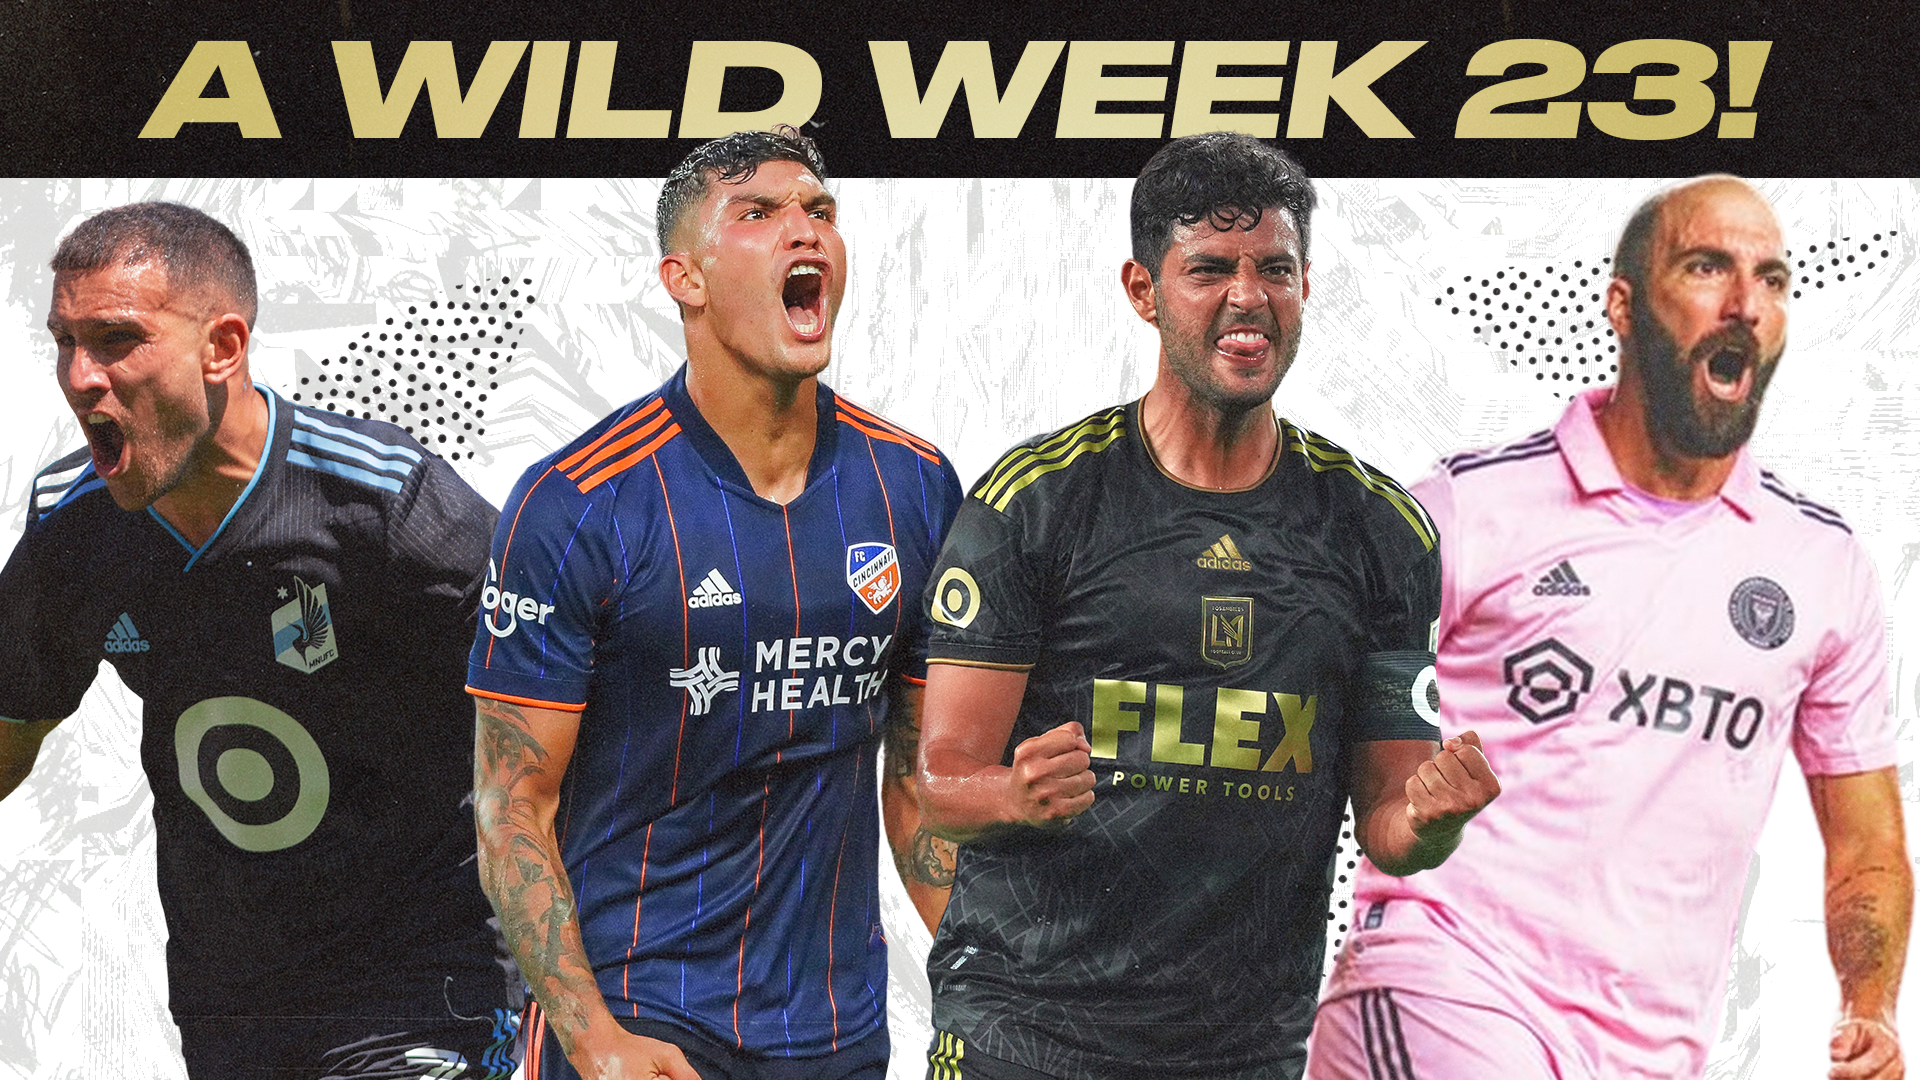 Goalfests steal the show, Austin flaunt contender credentials & more from Week 23